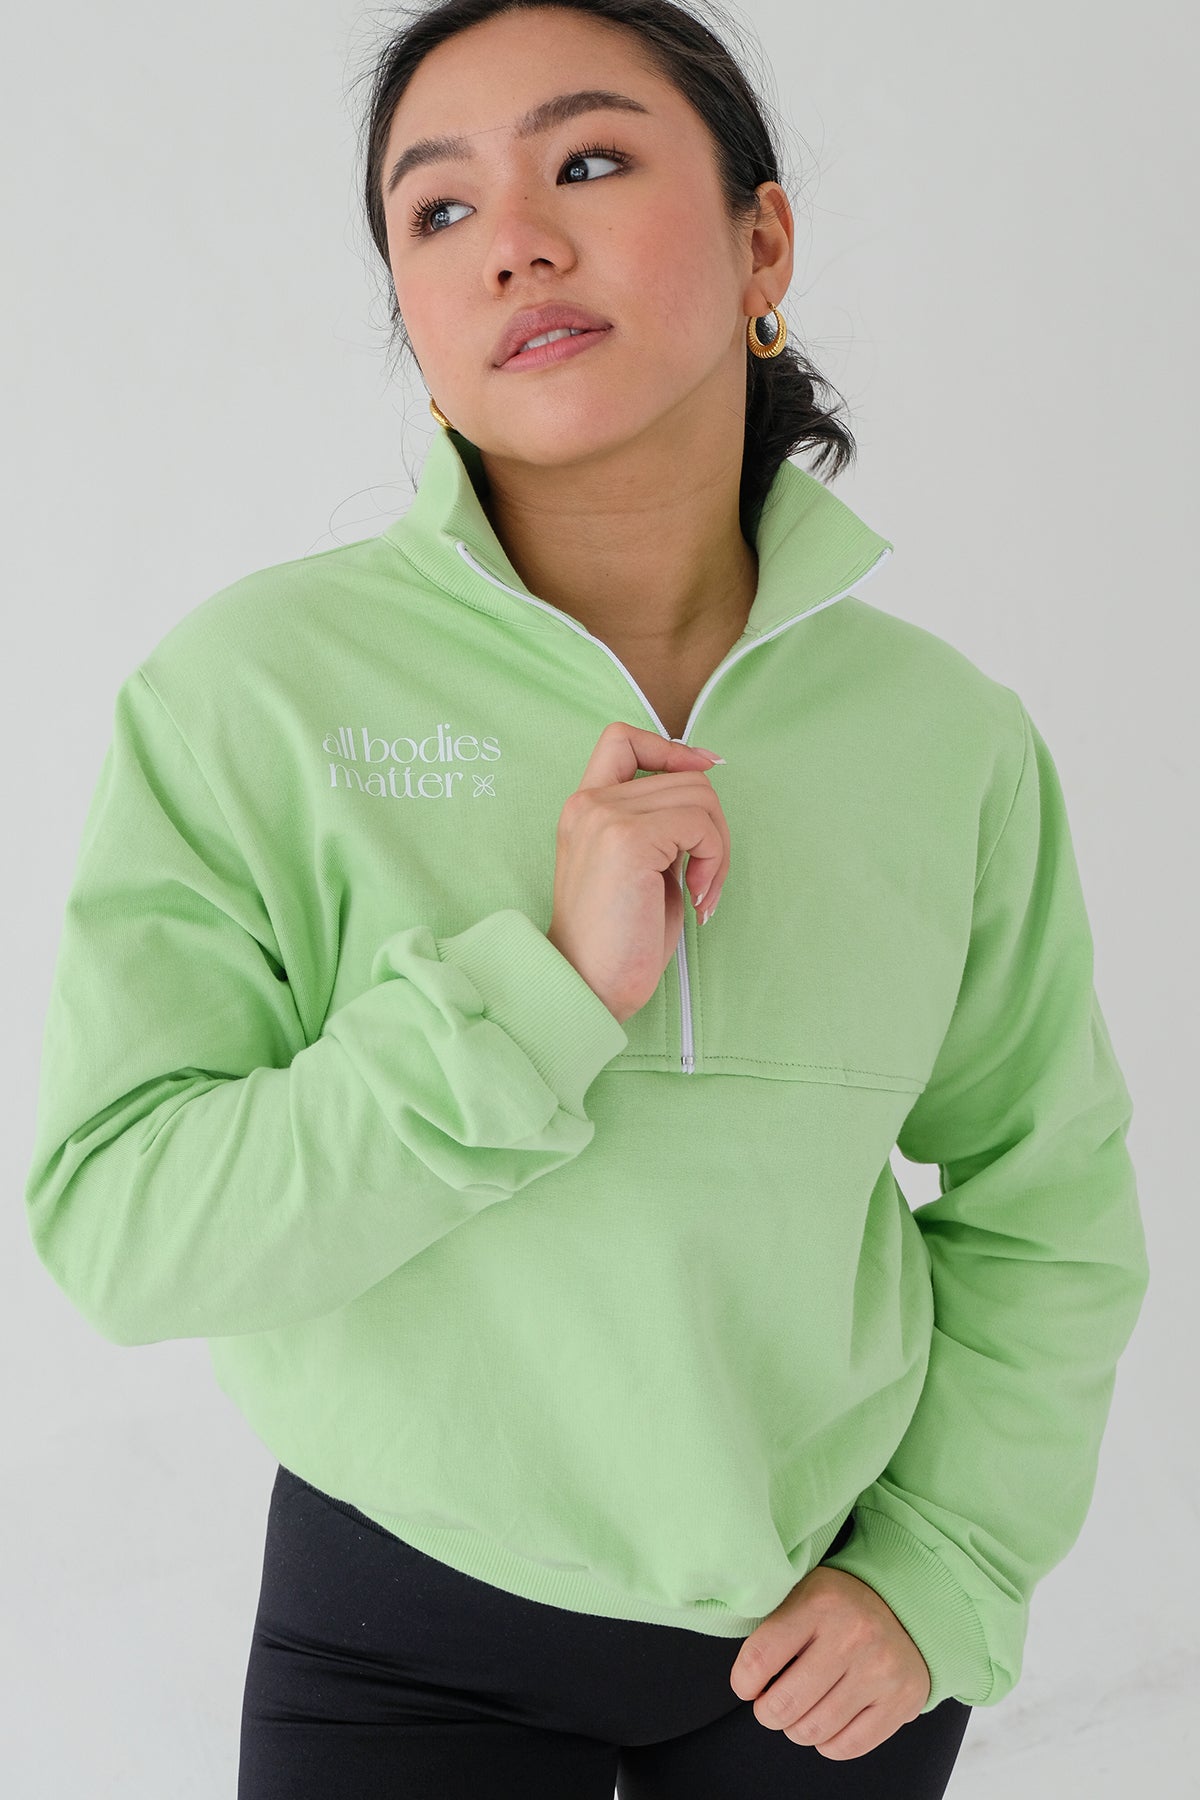 All Bodies Matter Sweater In Lime